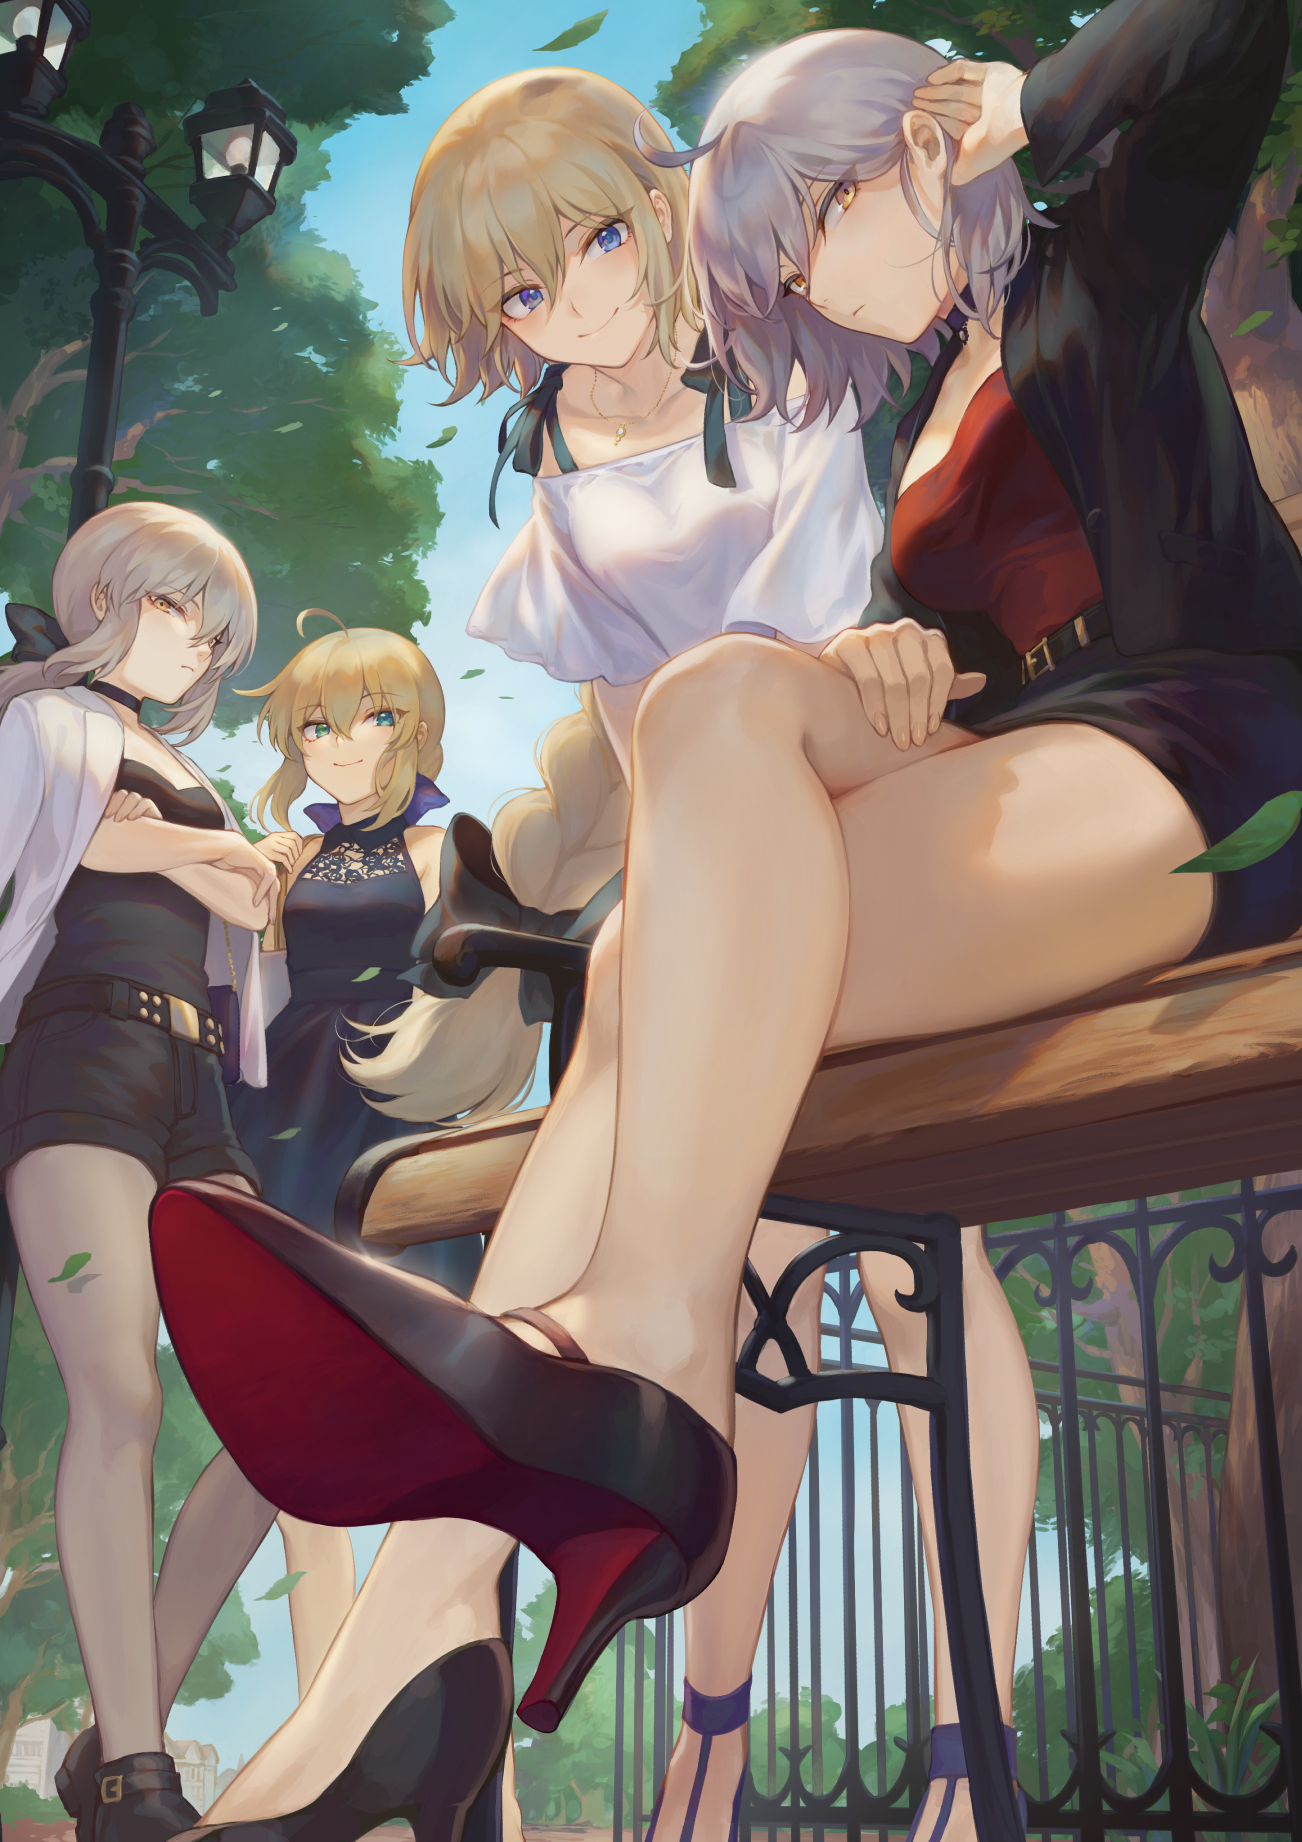 Anime 1302x1842 anime girls anime low-angle Fate series Fate/Stay Night thighs Fate/Apocrypha  2D Fate/Grand Order blonde bangs Artoria Pendragon Saber Alter Saber Ruler (Fate/Apocrypha) Jeanne (Alter) (Fate/Grand Order) Jeanne d'Arc (Fate) portrait display fan art Mashu 003